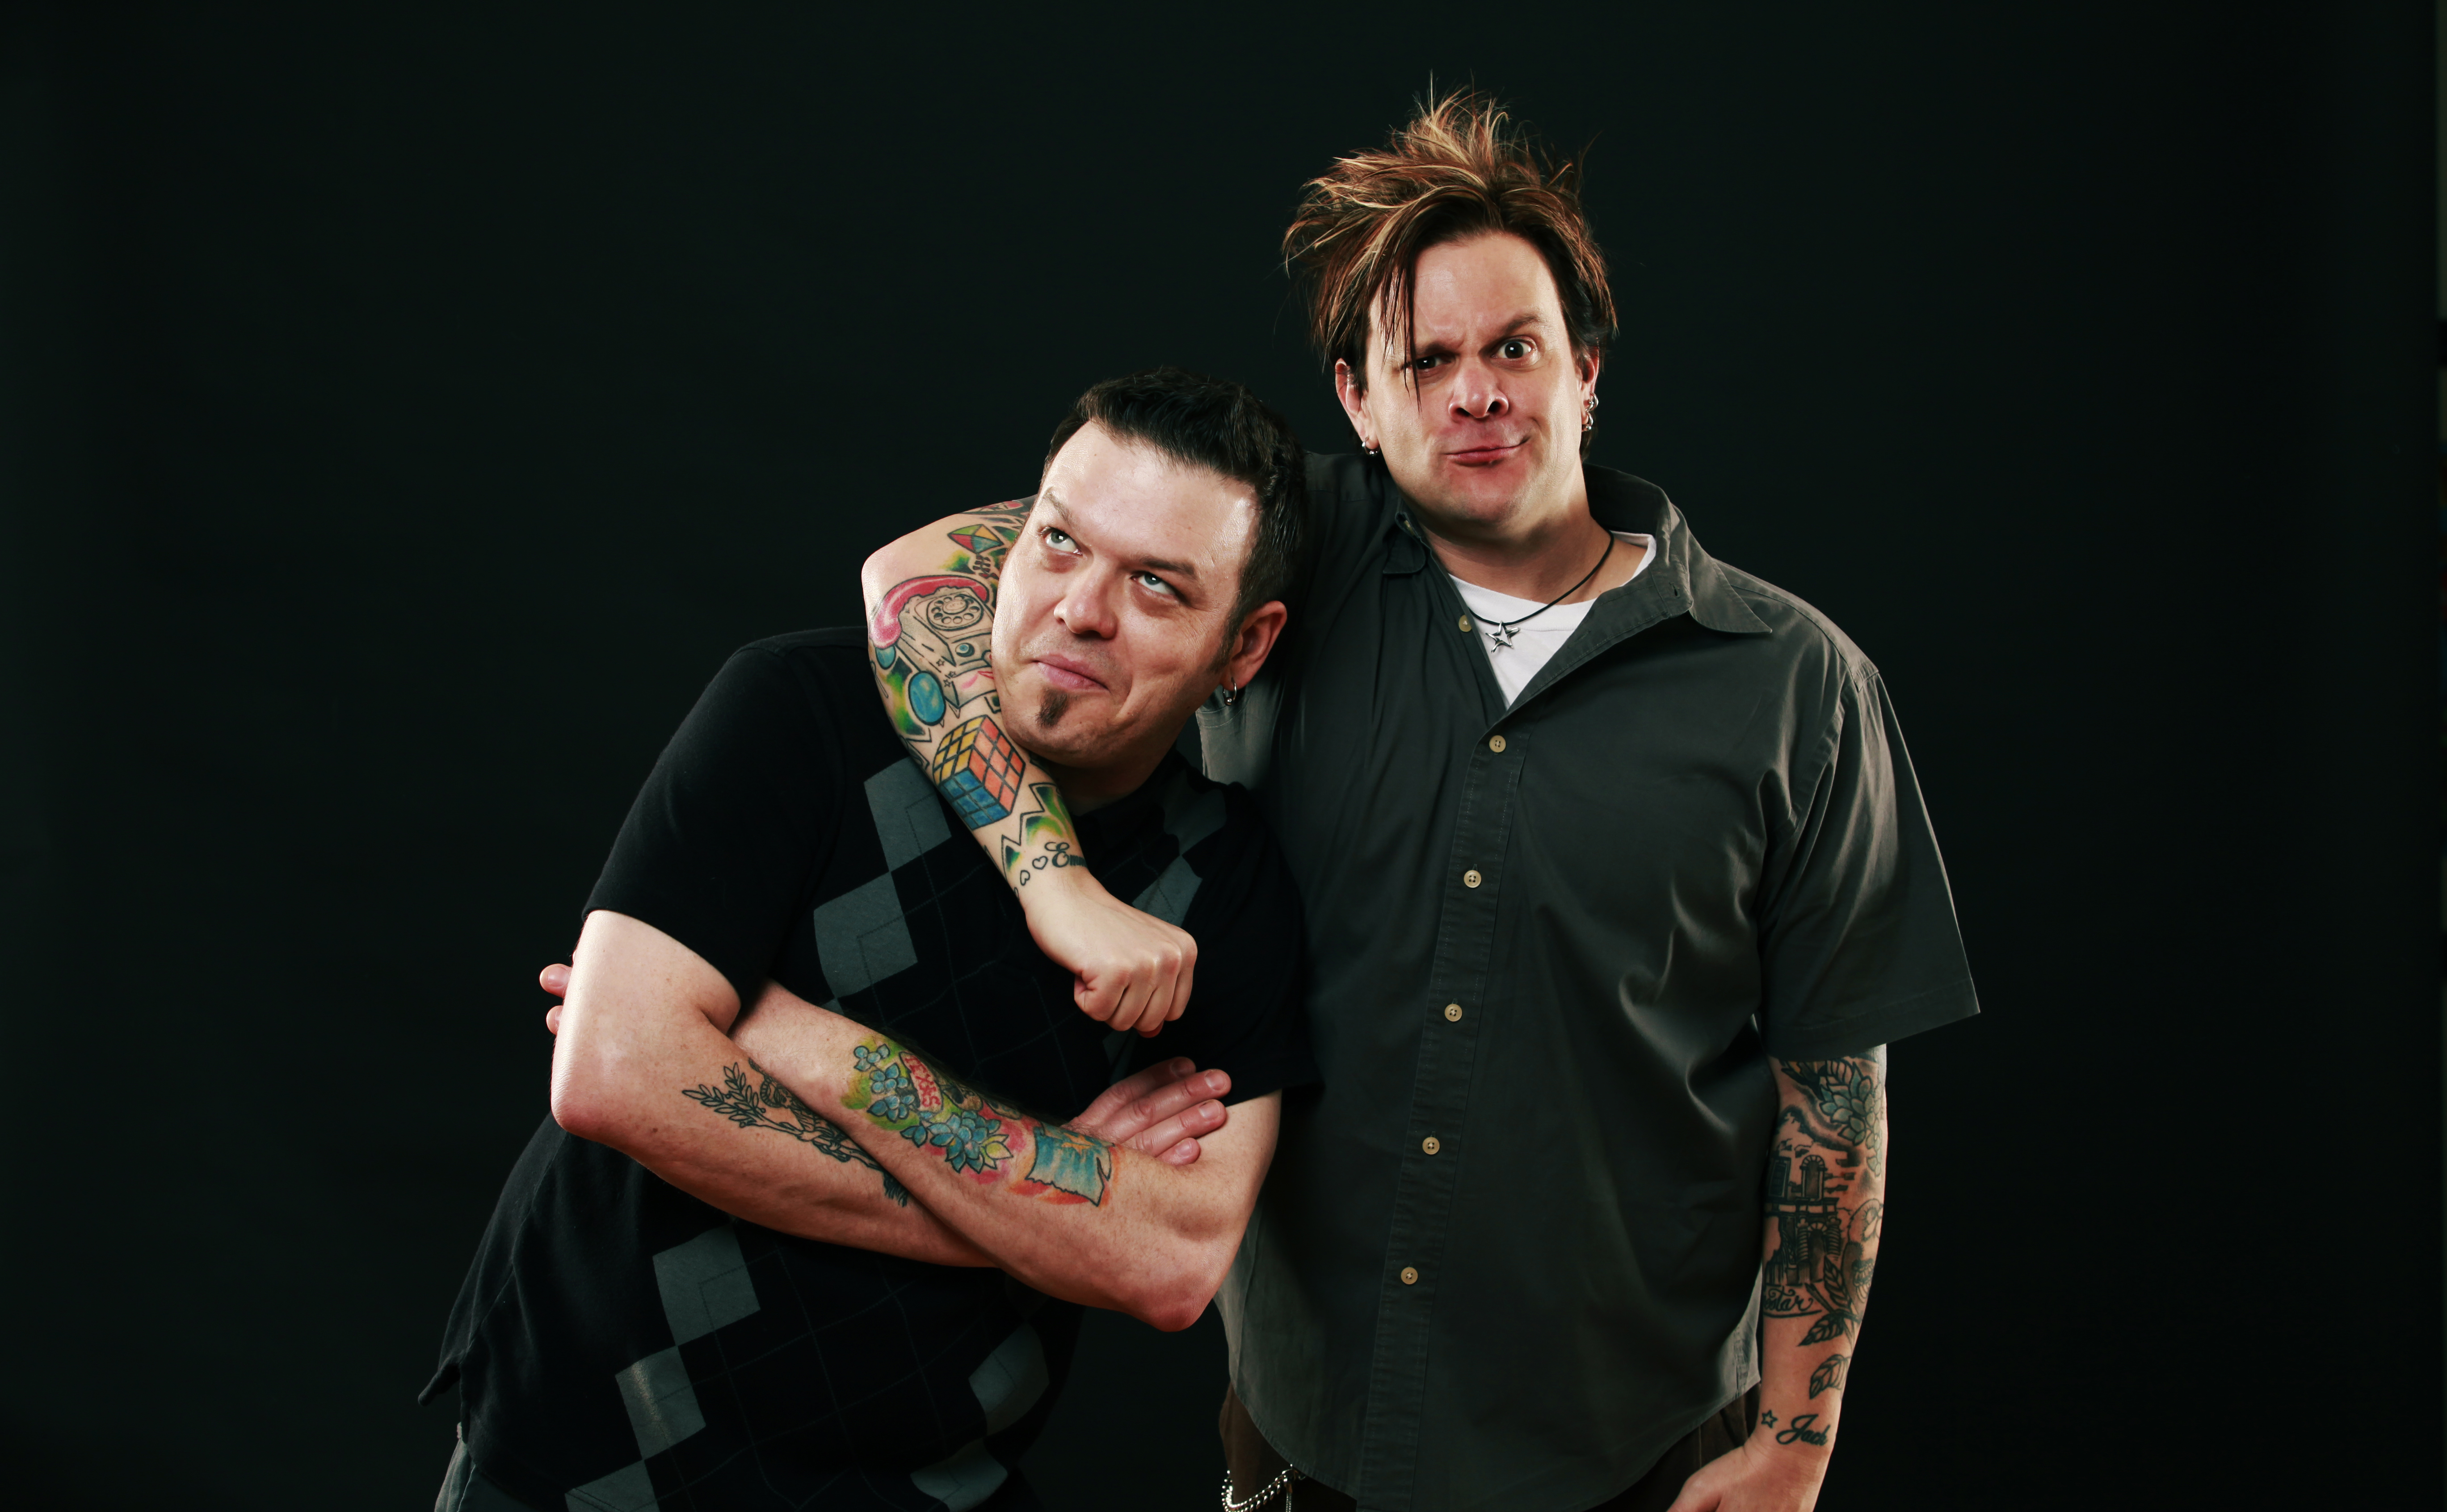 Beers, Cheers and tears as Bowling For Soup wave goodbye